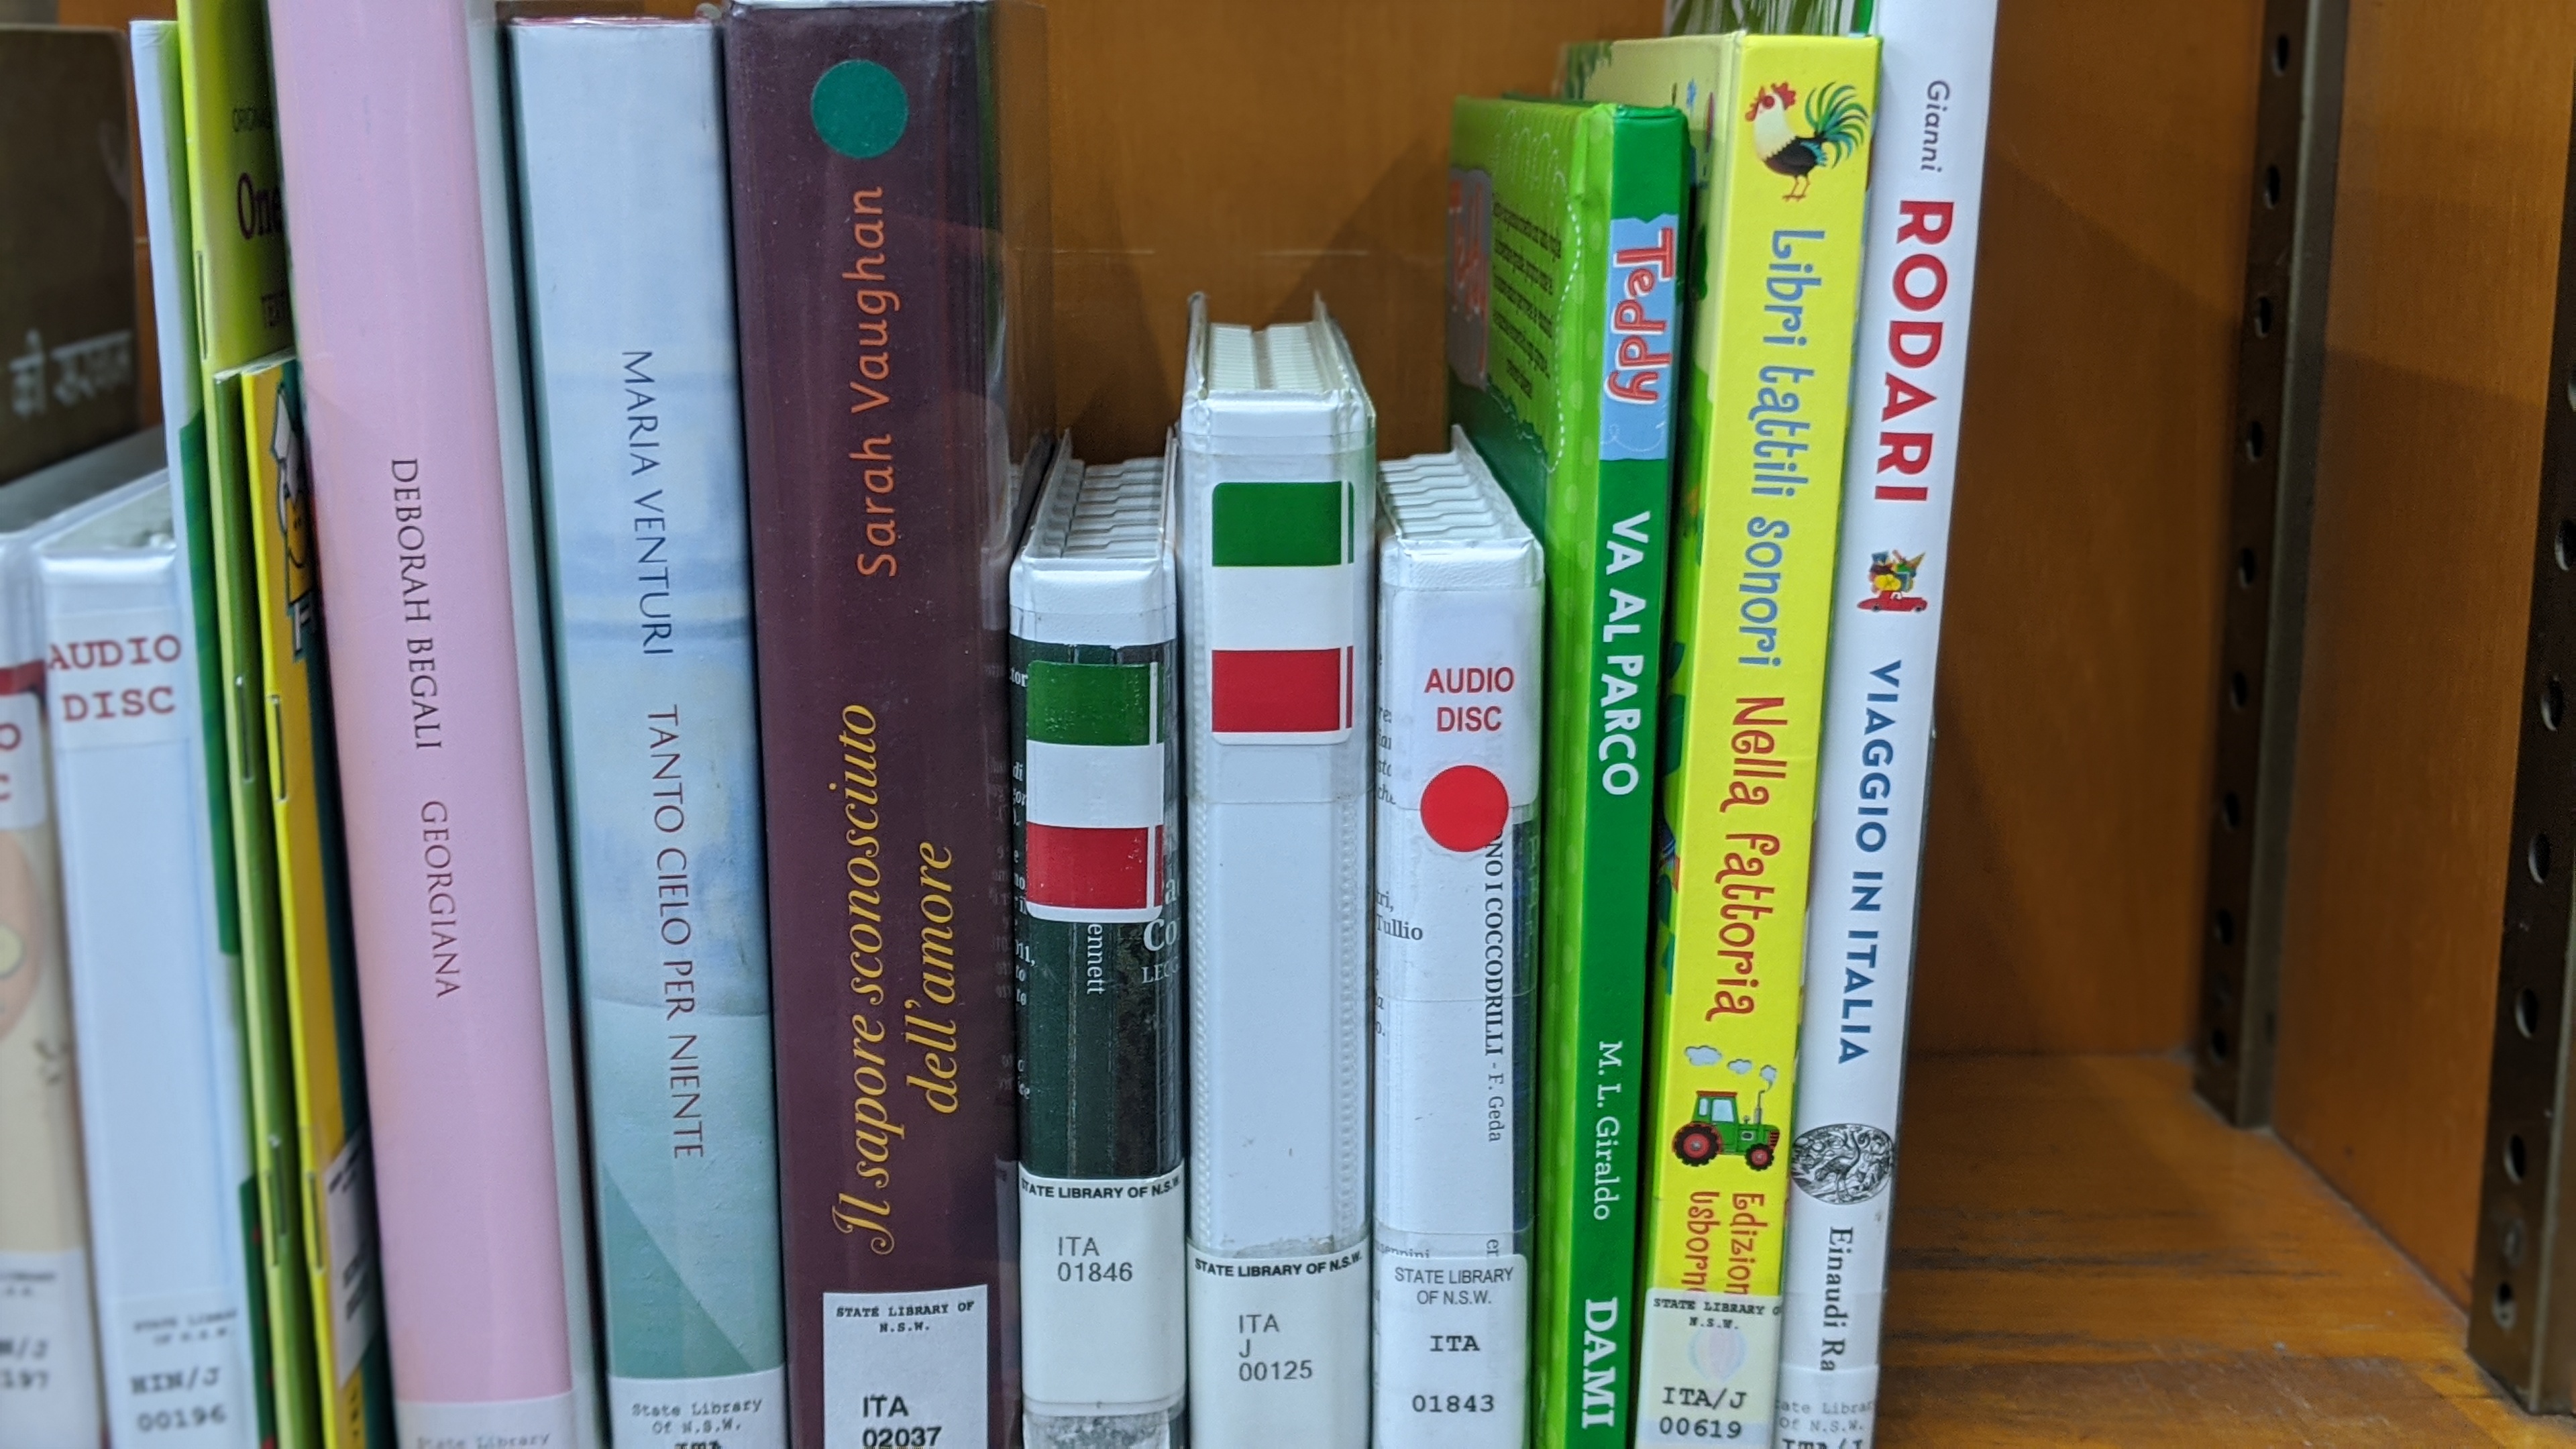 Photo of the Italian books on the shelf, spine view